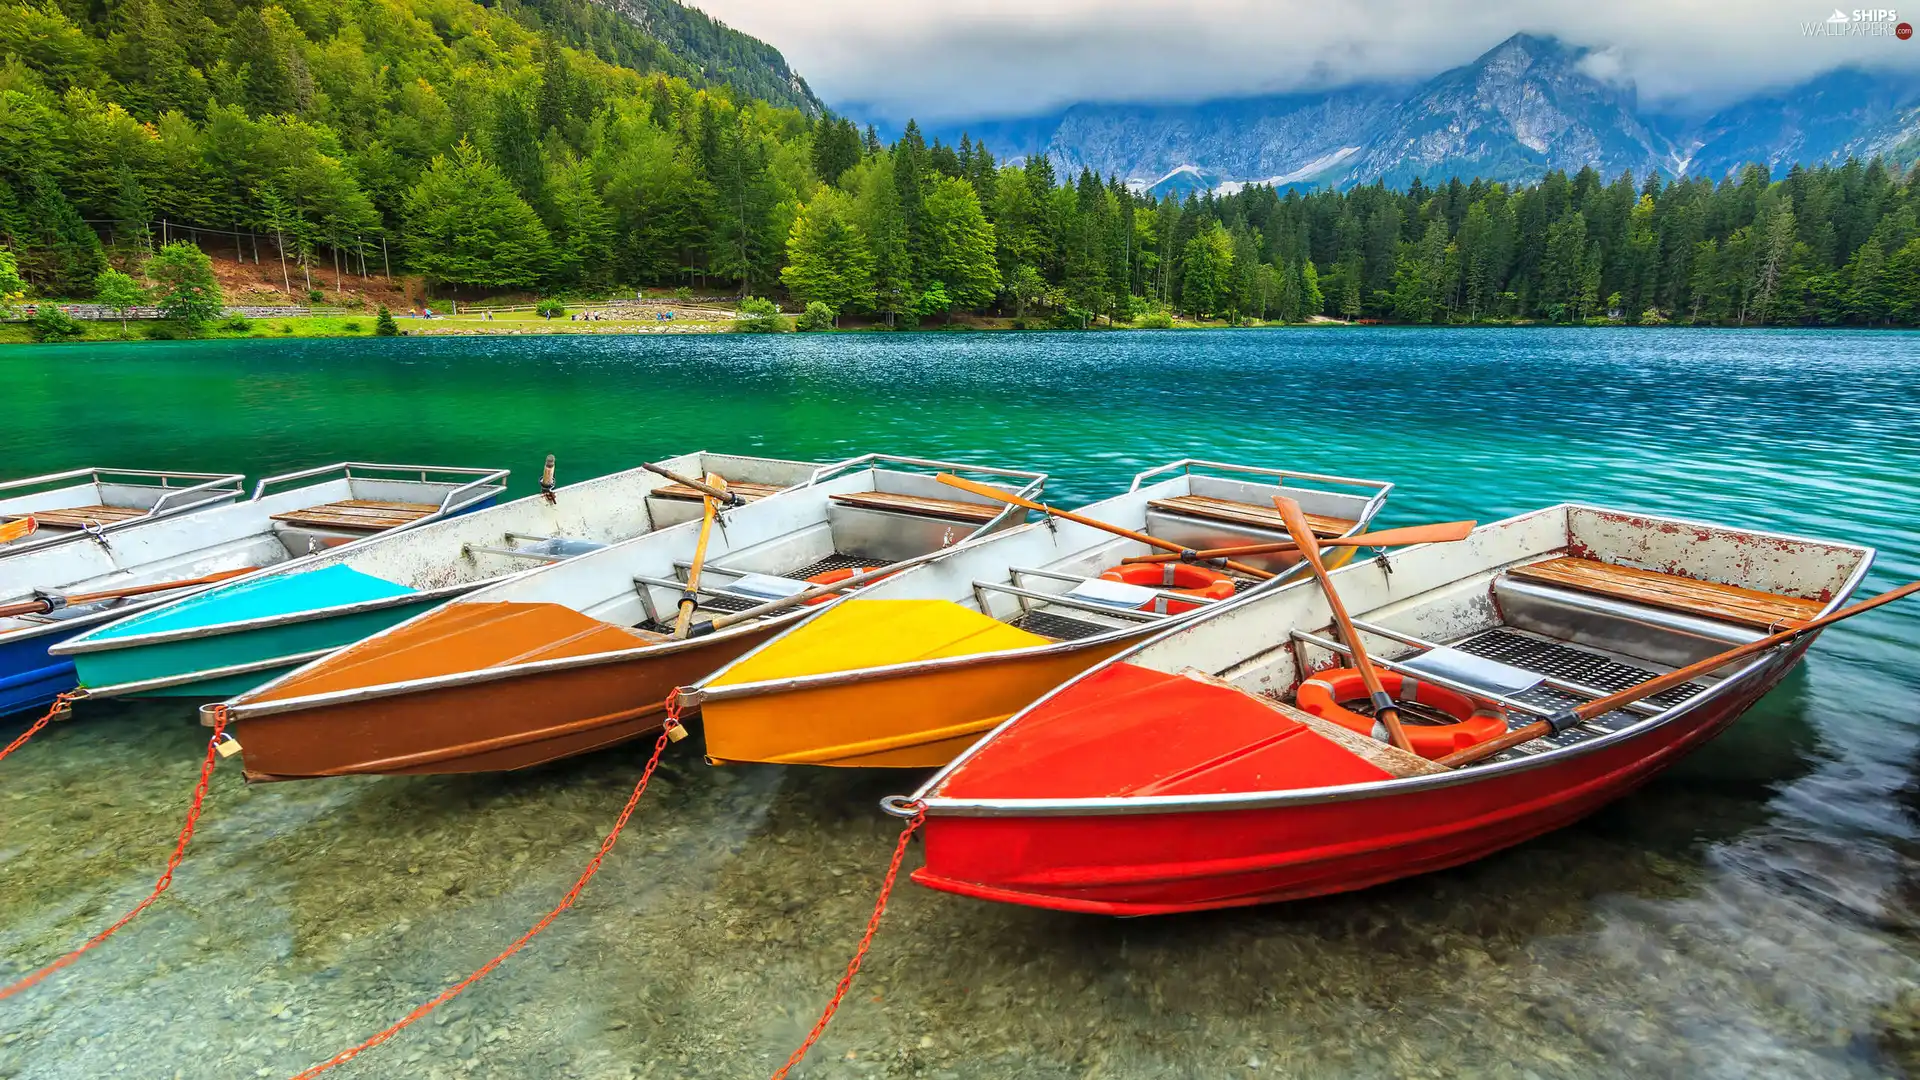 Alps, Fusine Lake, color, Mountains, Italy, woods, boats